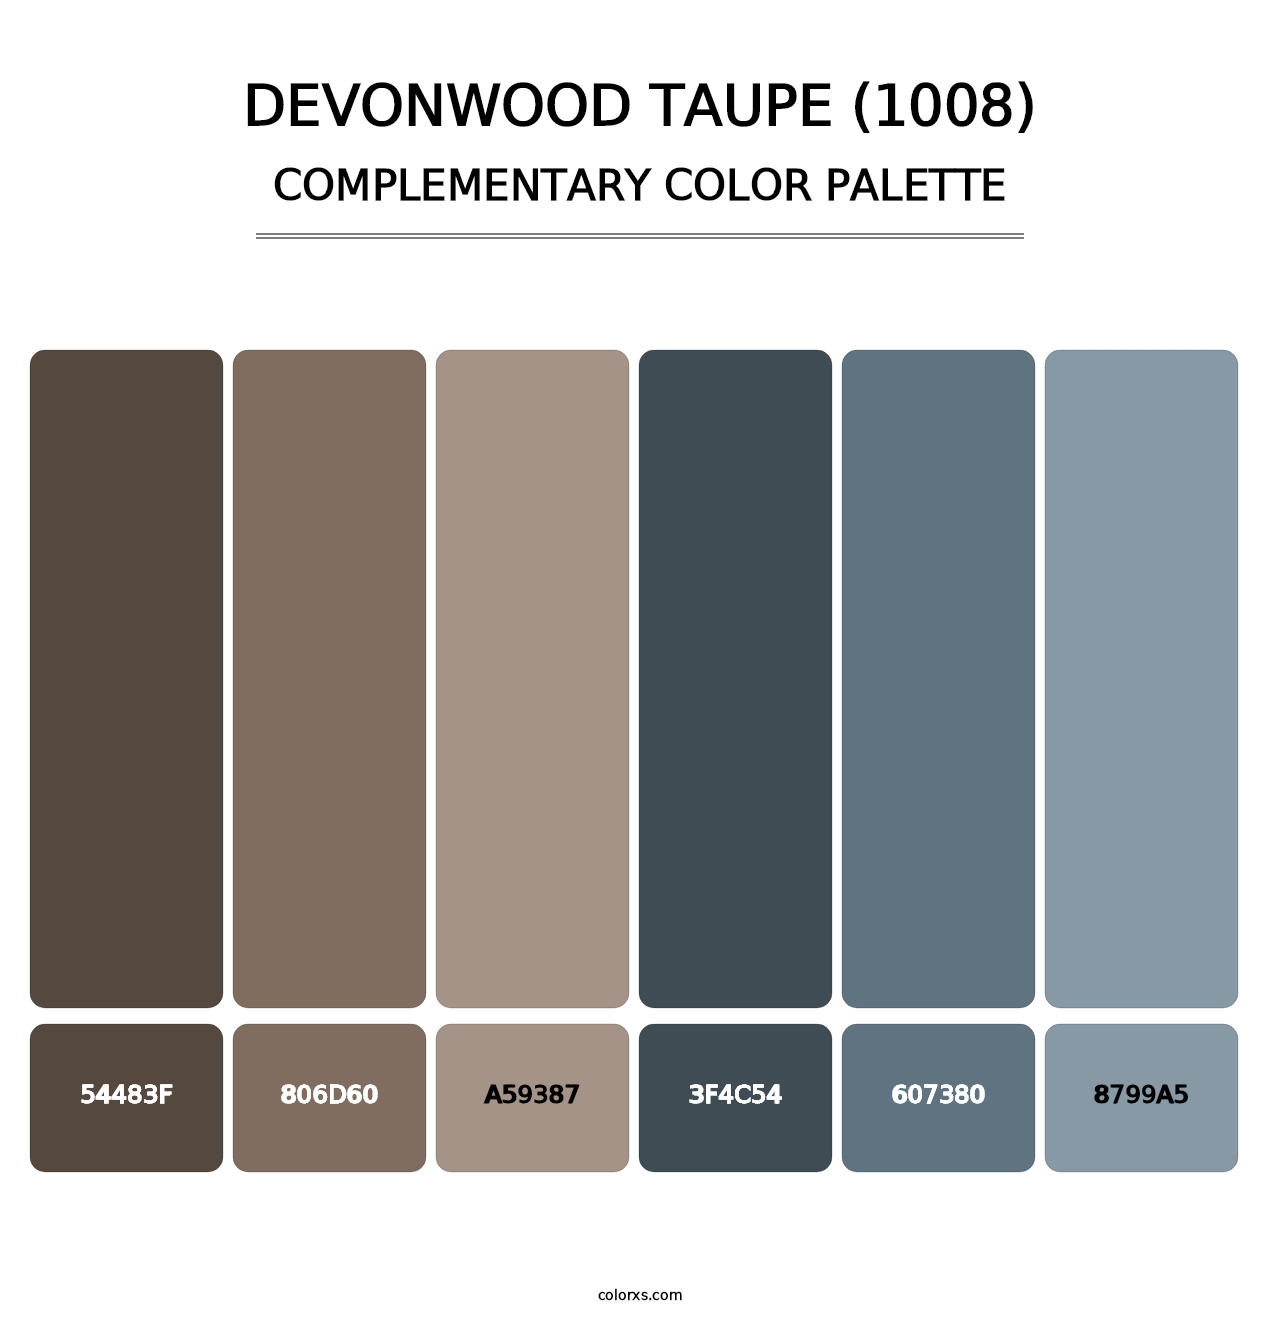 Devonwood Taupe (1008) - Complementary Color Palette